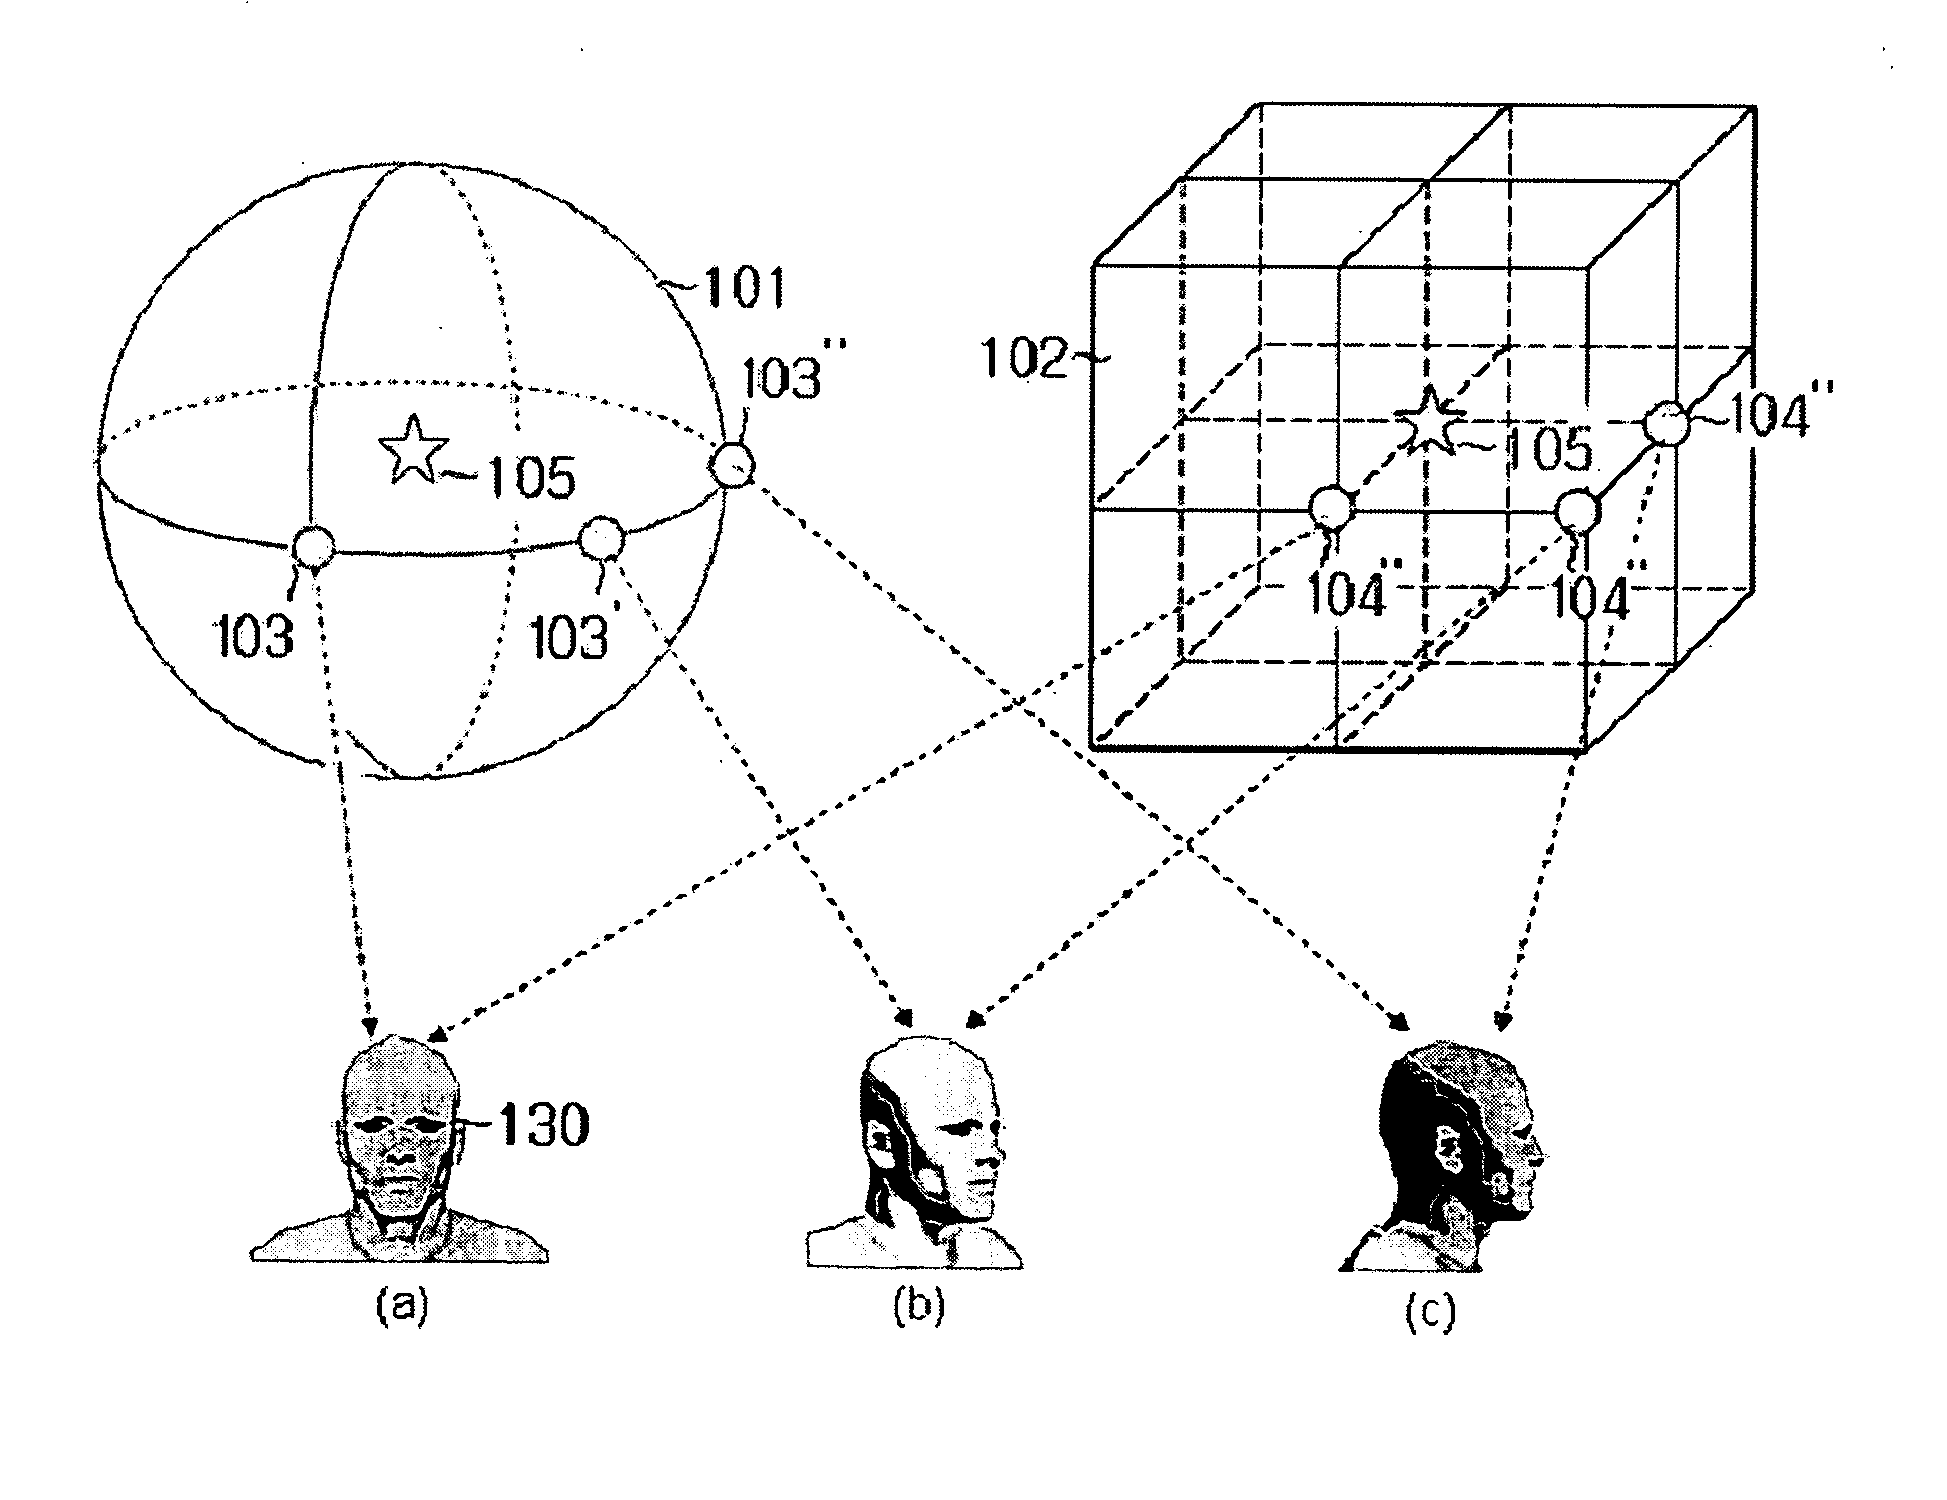 Method of representing and animating two-dimensional humanoid character in three-dimensional space